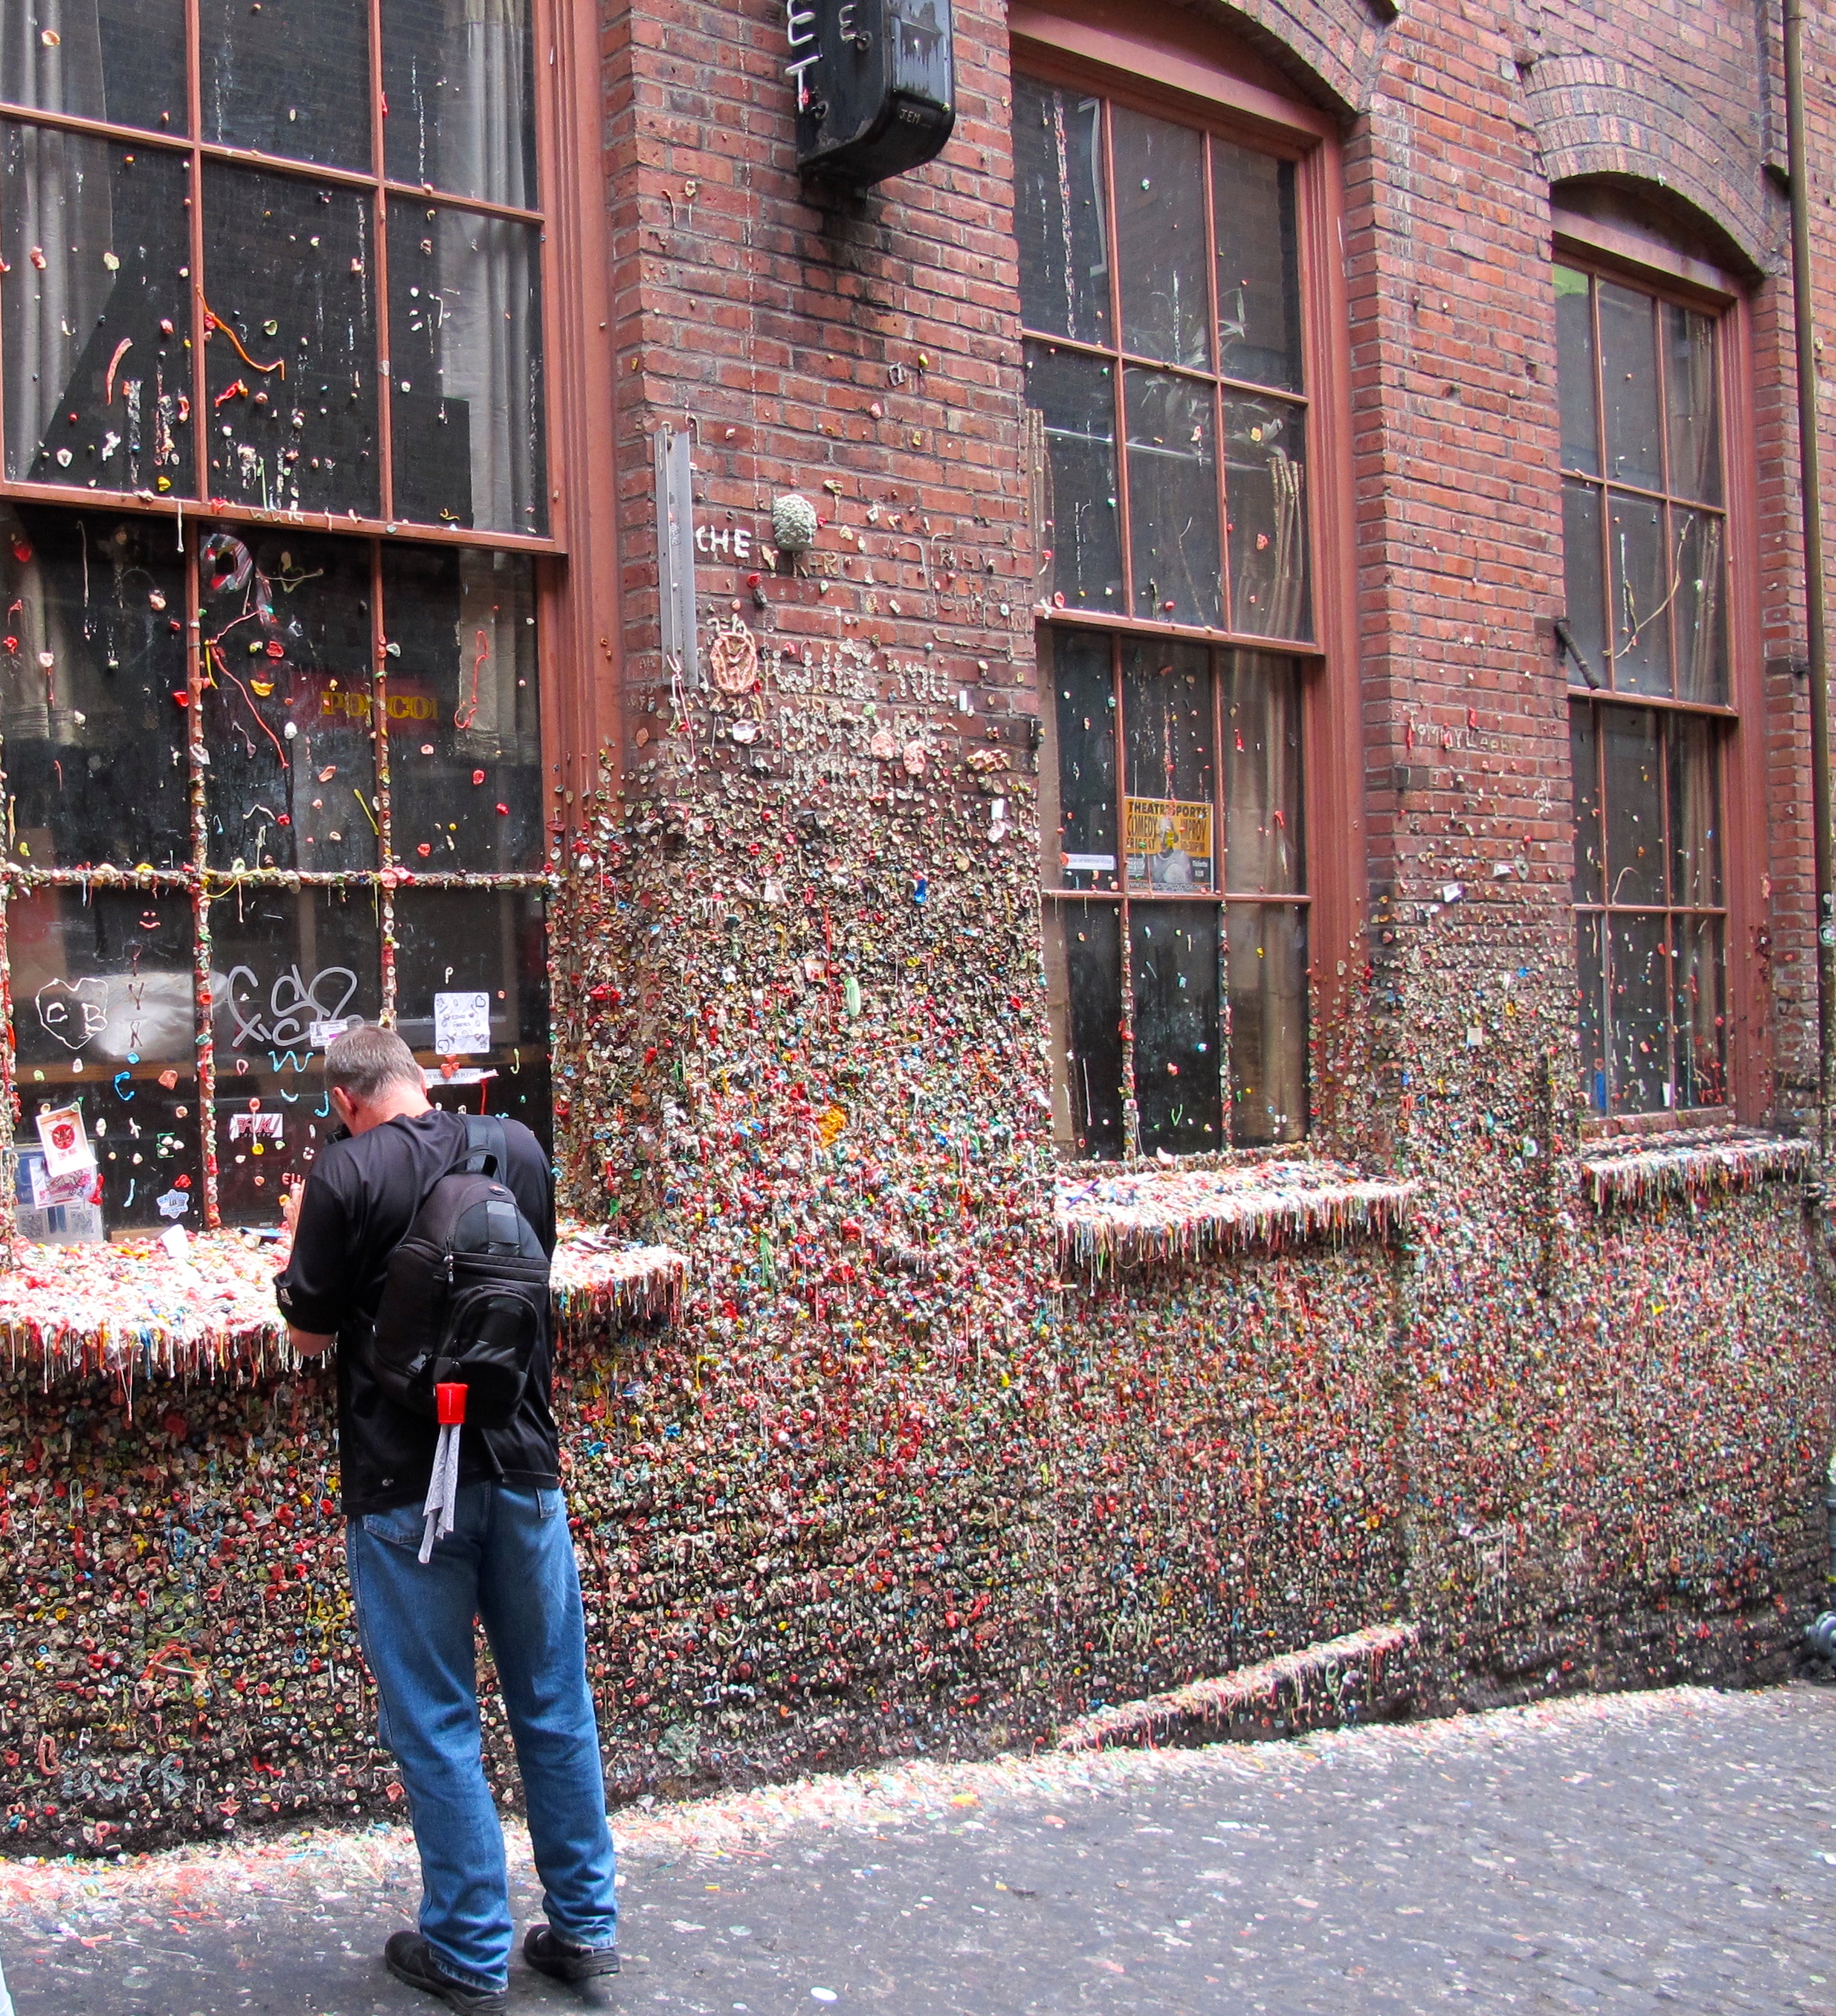 Not for germaphobes, the Gum Wall is many inches thick over 15-feet high!